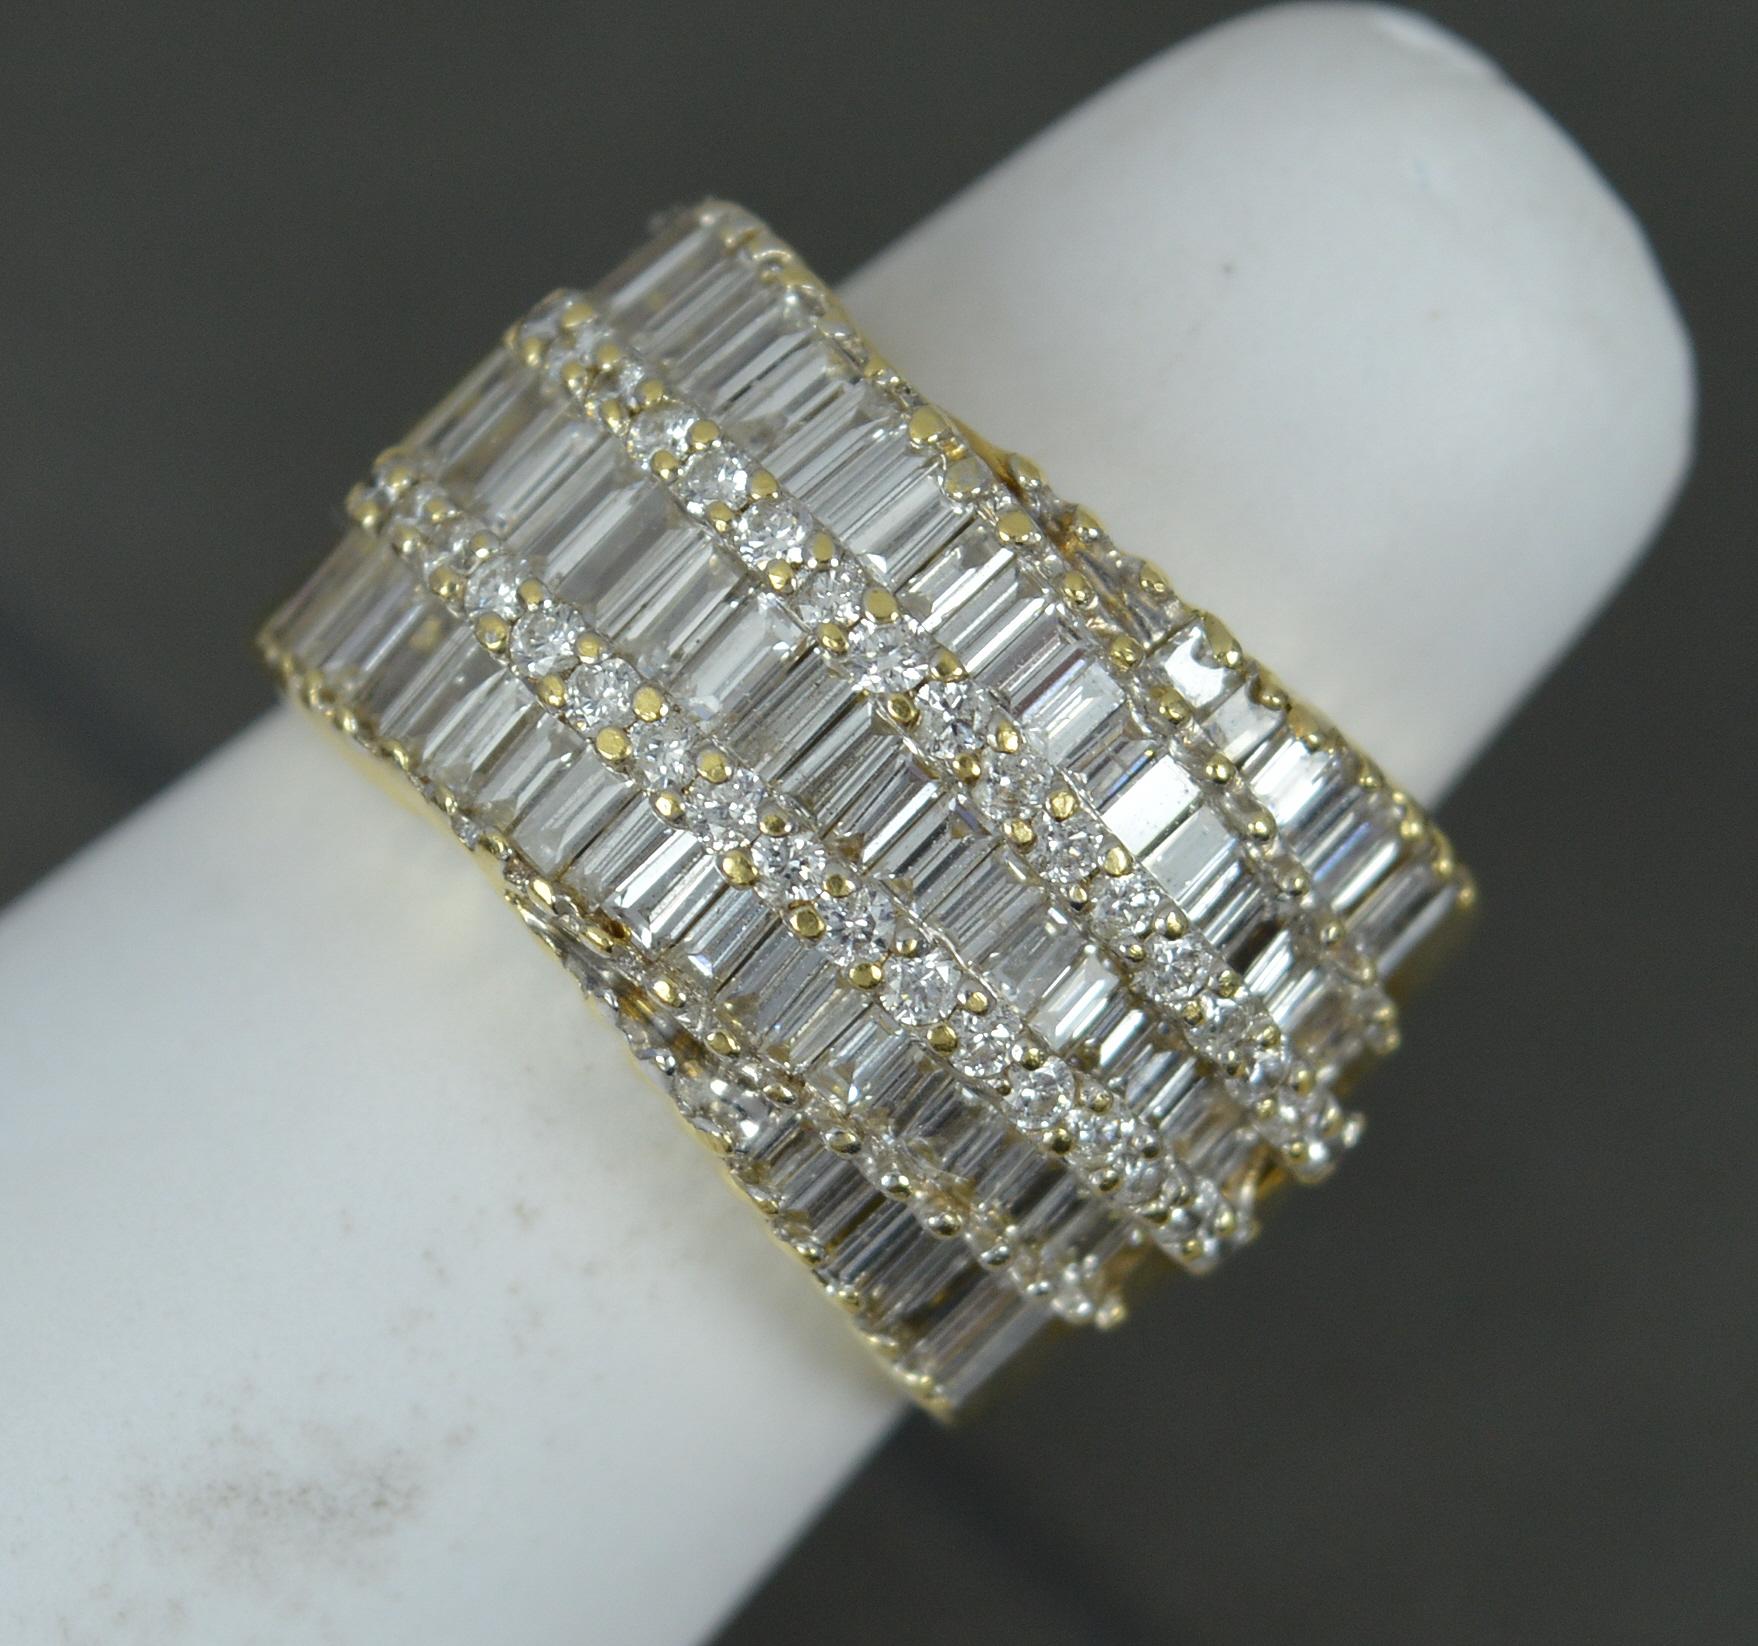 Heavy Bling 3.00 Carat Diamond and 18 Carat Yellow Gold Cluster Ring For Sale 2